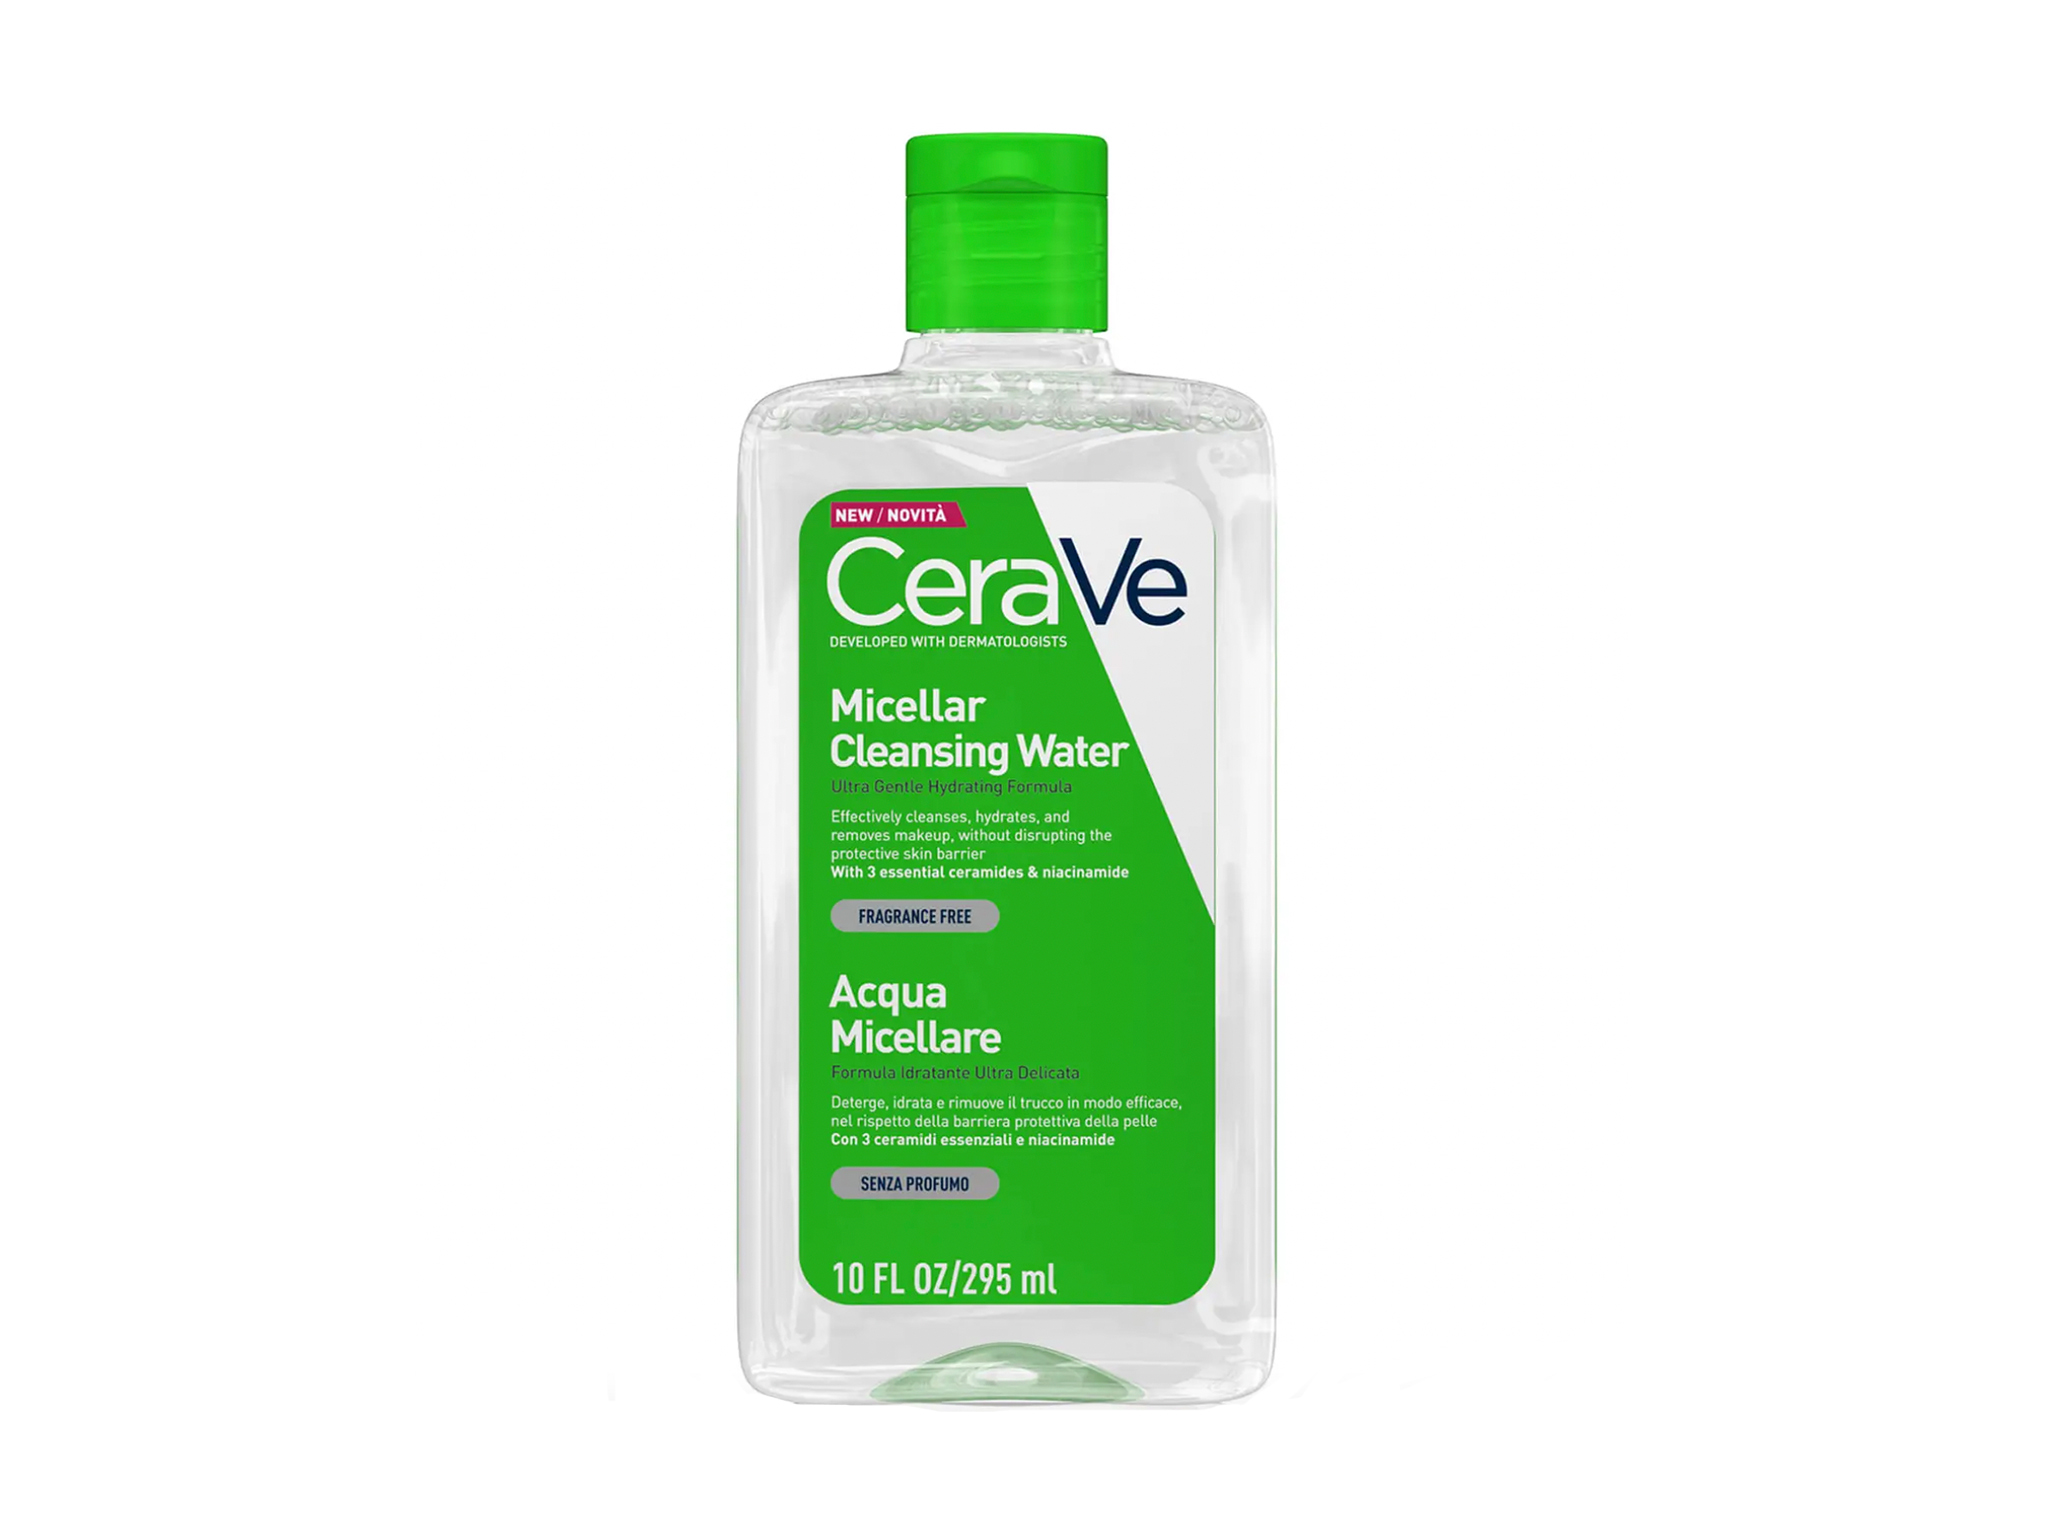 CeraVe micellar cleansing water